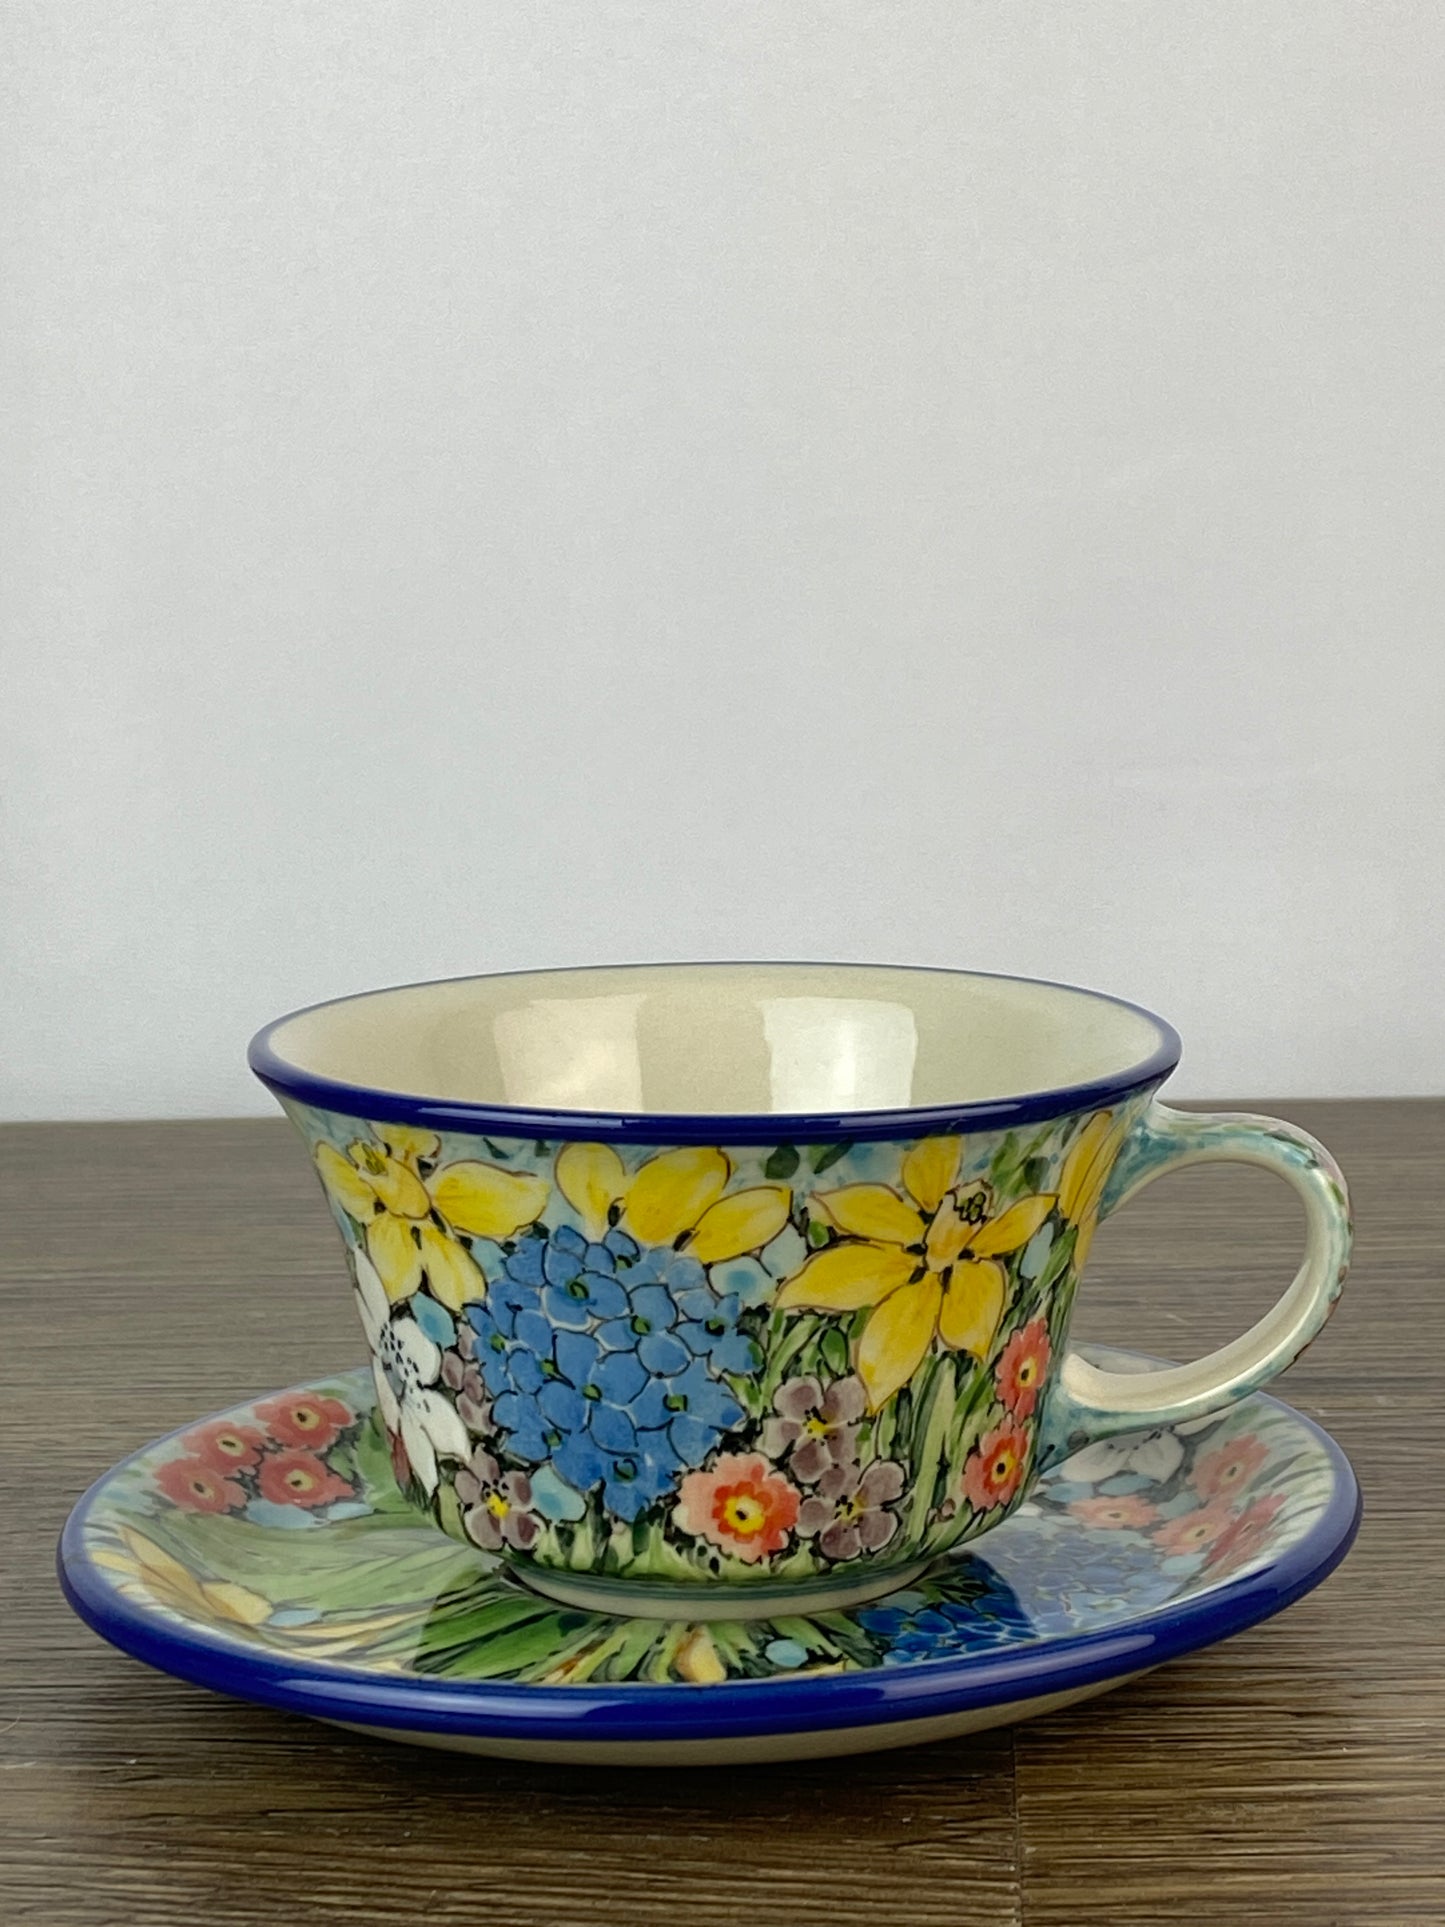 Teresa Liana Limited Edition Cup and Saucer - Shape F76 - Pattern L998 - A